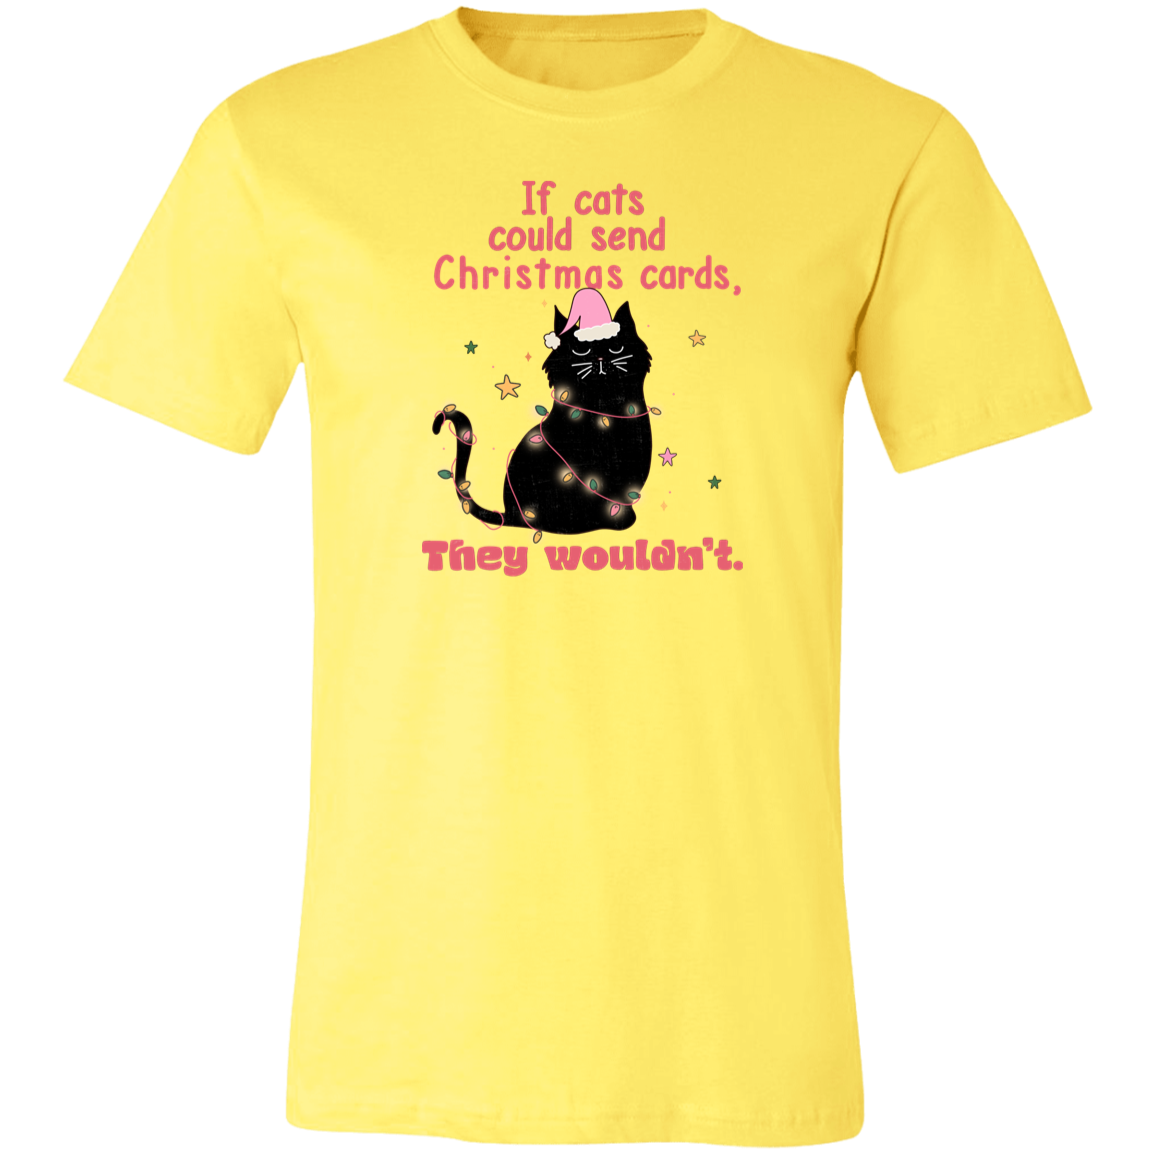 If Cats Could Send Christmas Cards, They Wouldn't Shirt